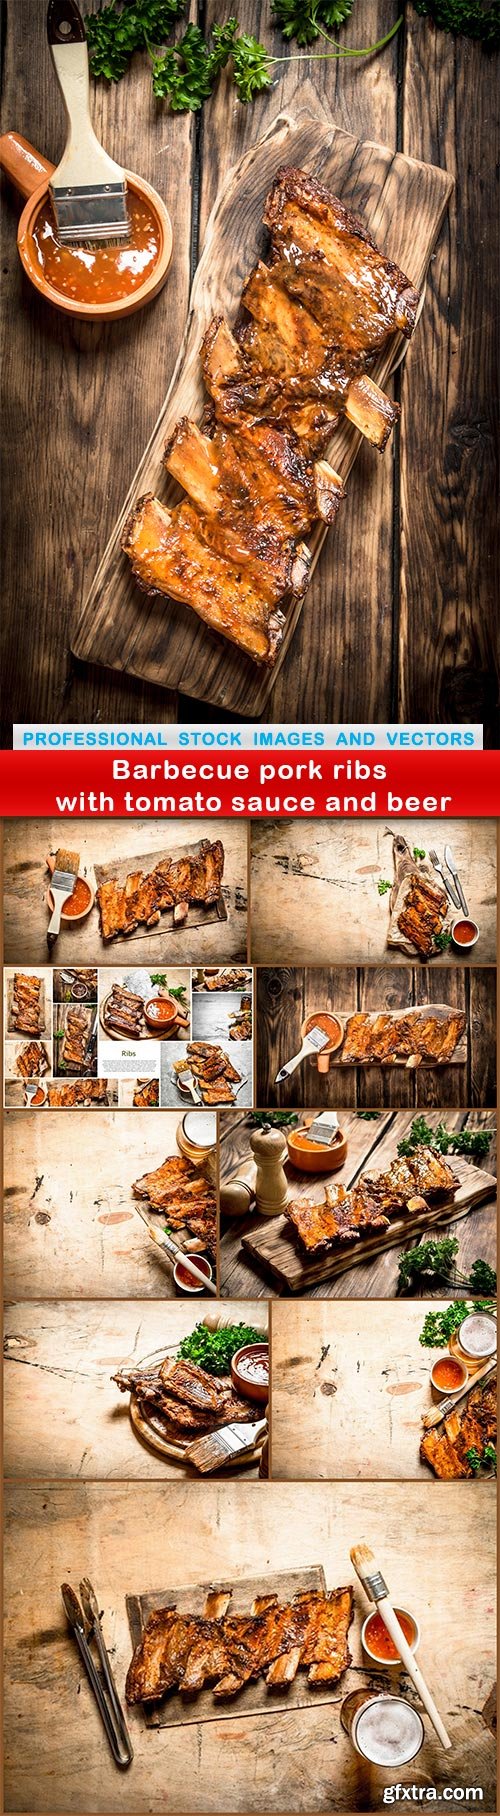 Barbecue pork ribs with tomato sauce and beer - 10 UHQ JPEG